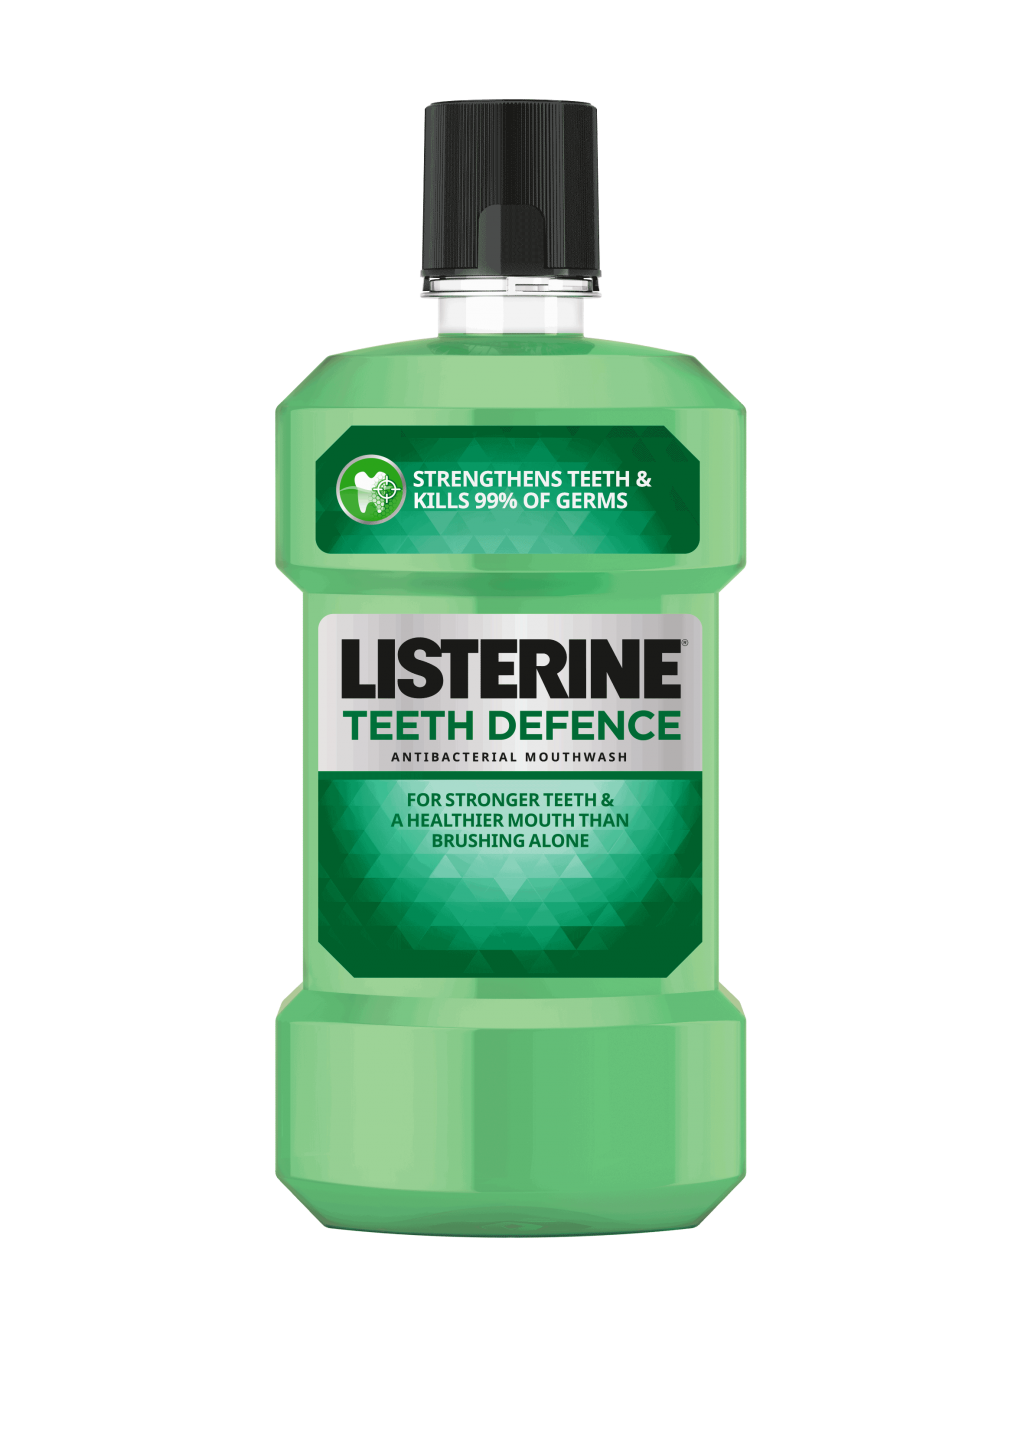 new-listerine-teethdefence-clean.png